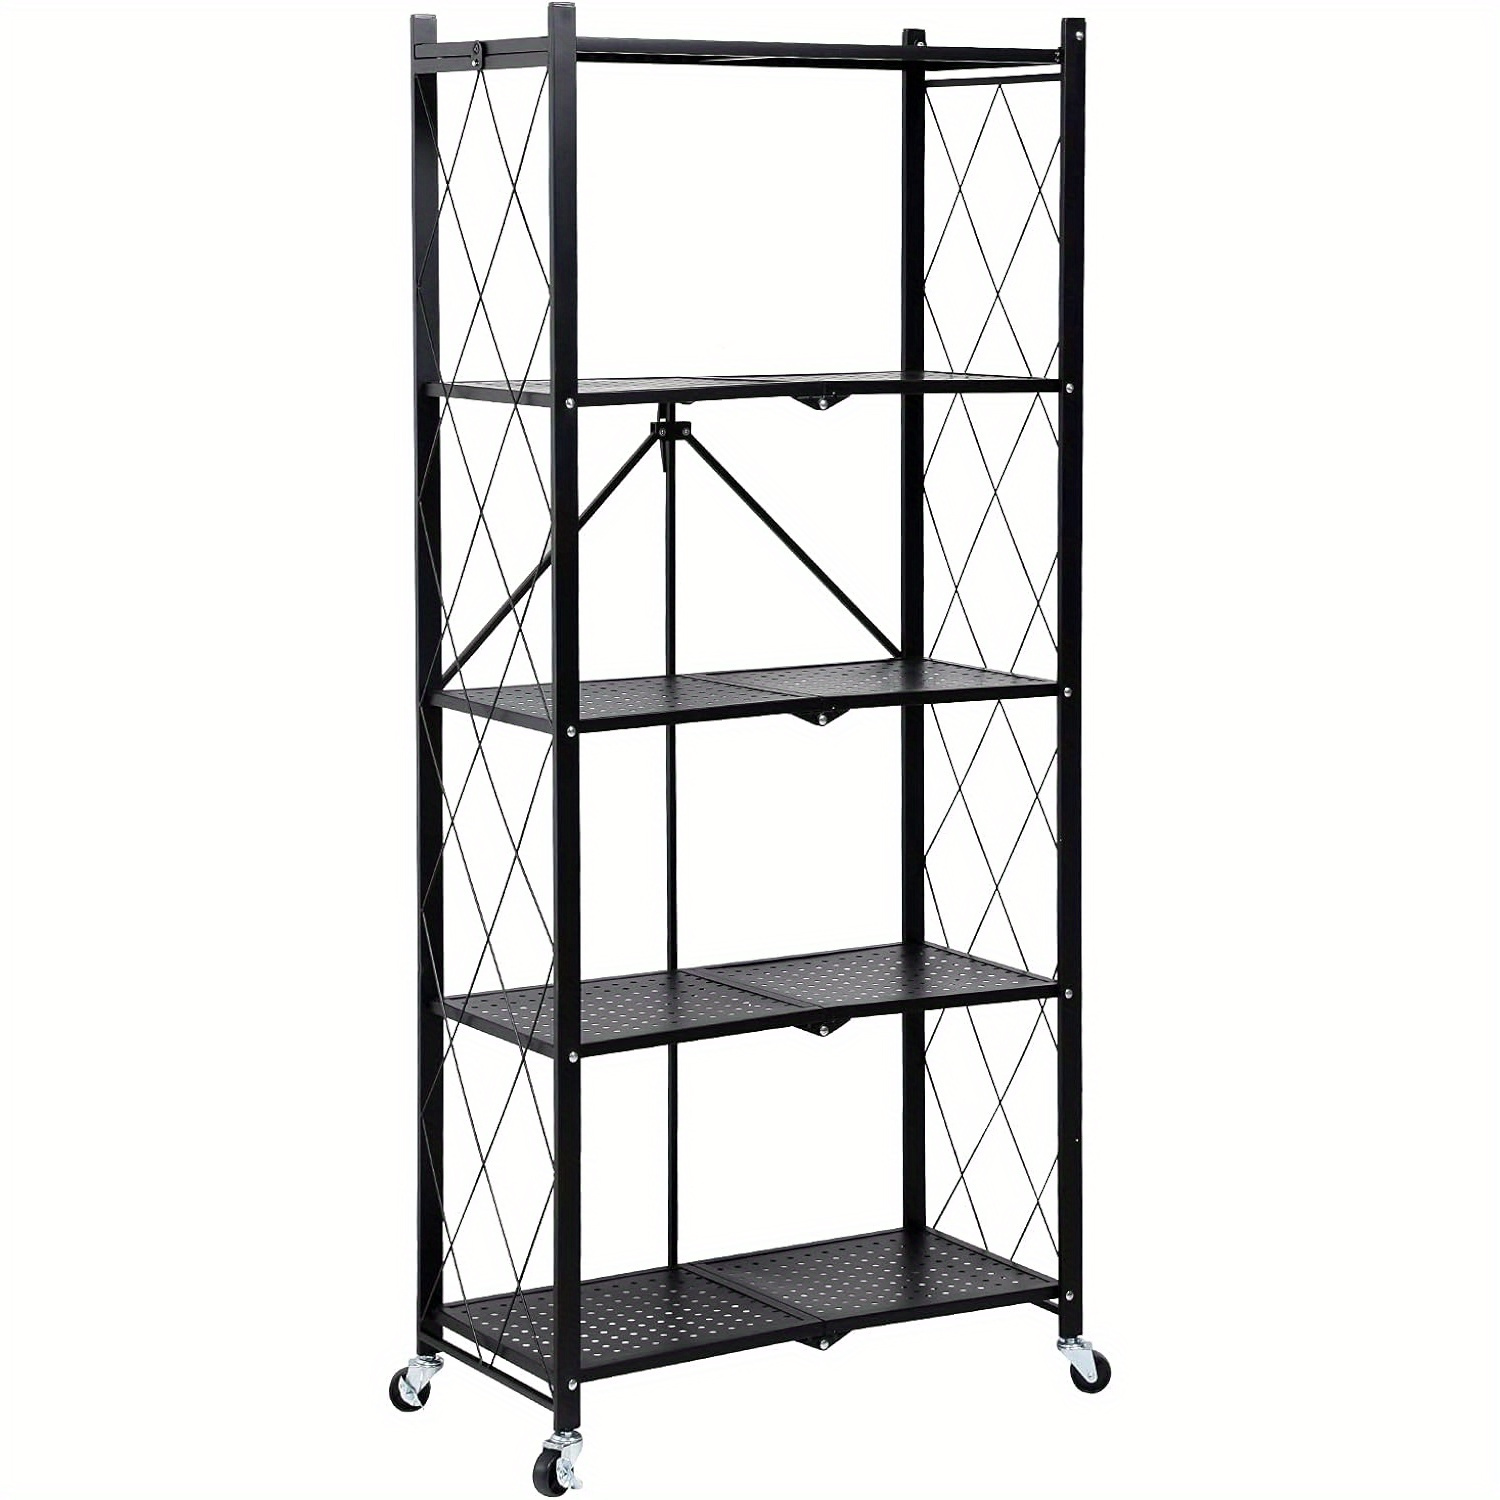 

5-tier Storage Shelving Unit W/hooks And Wheels, 27.95"x14.96"x63.78", Standing Foldable Storage Rack, Metal, Kitchen, Garage, No Assemble Require (white)